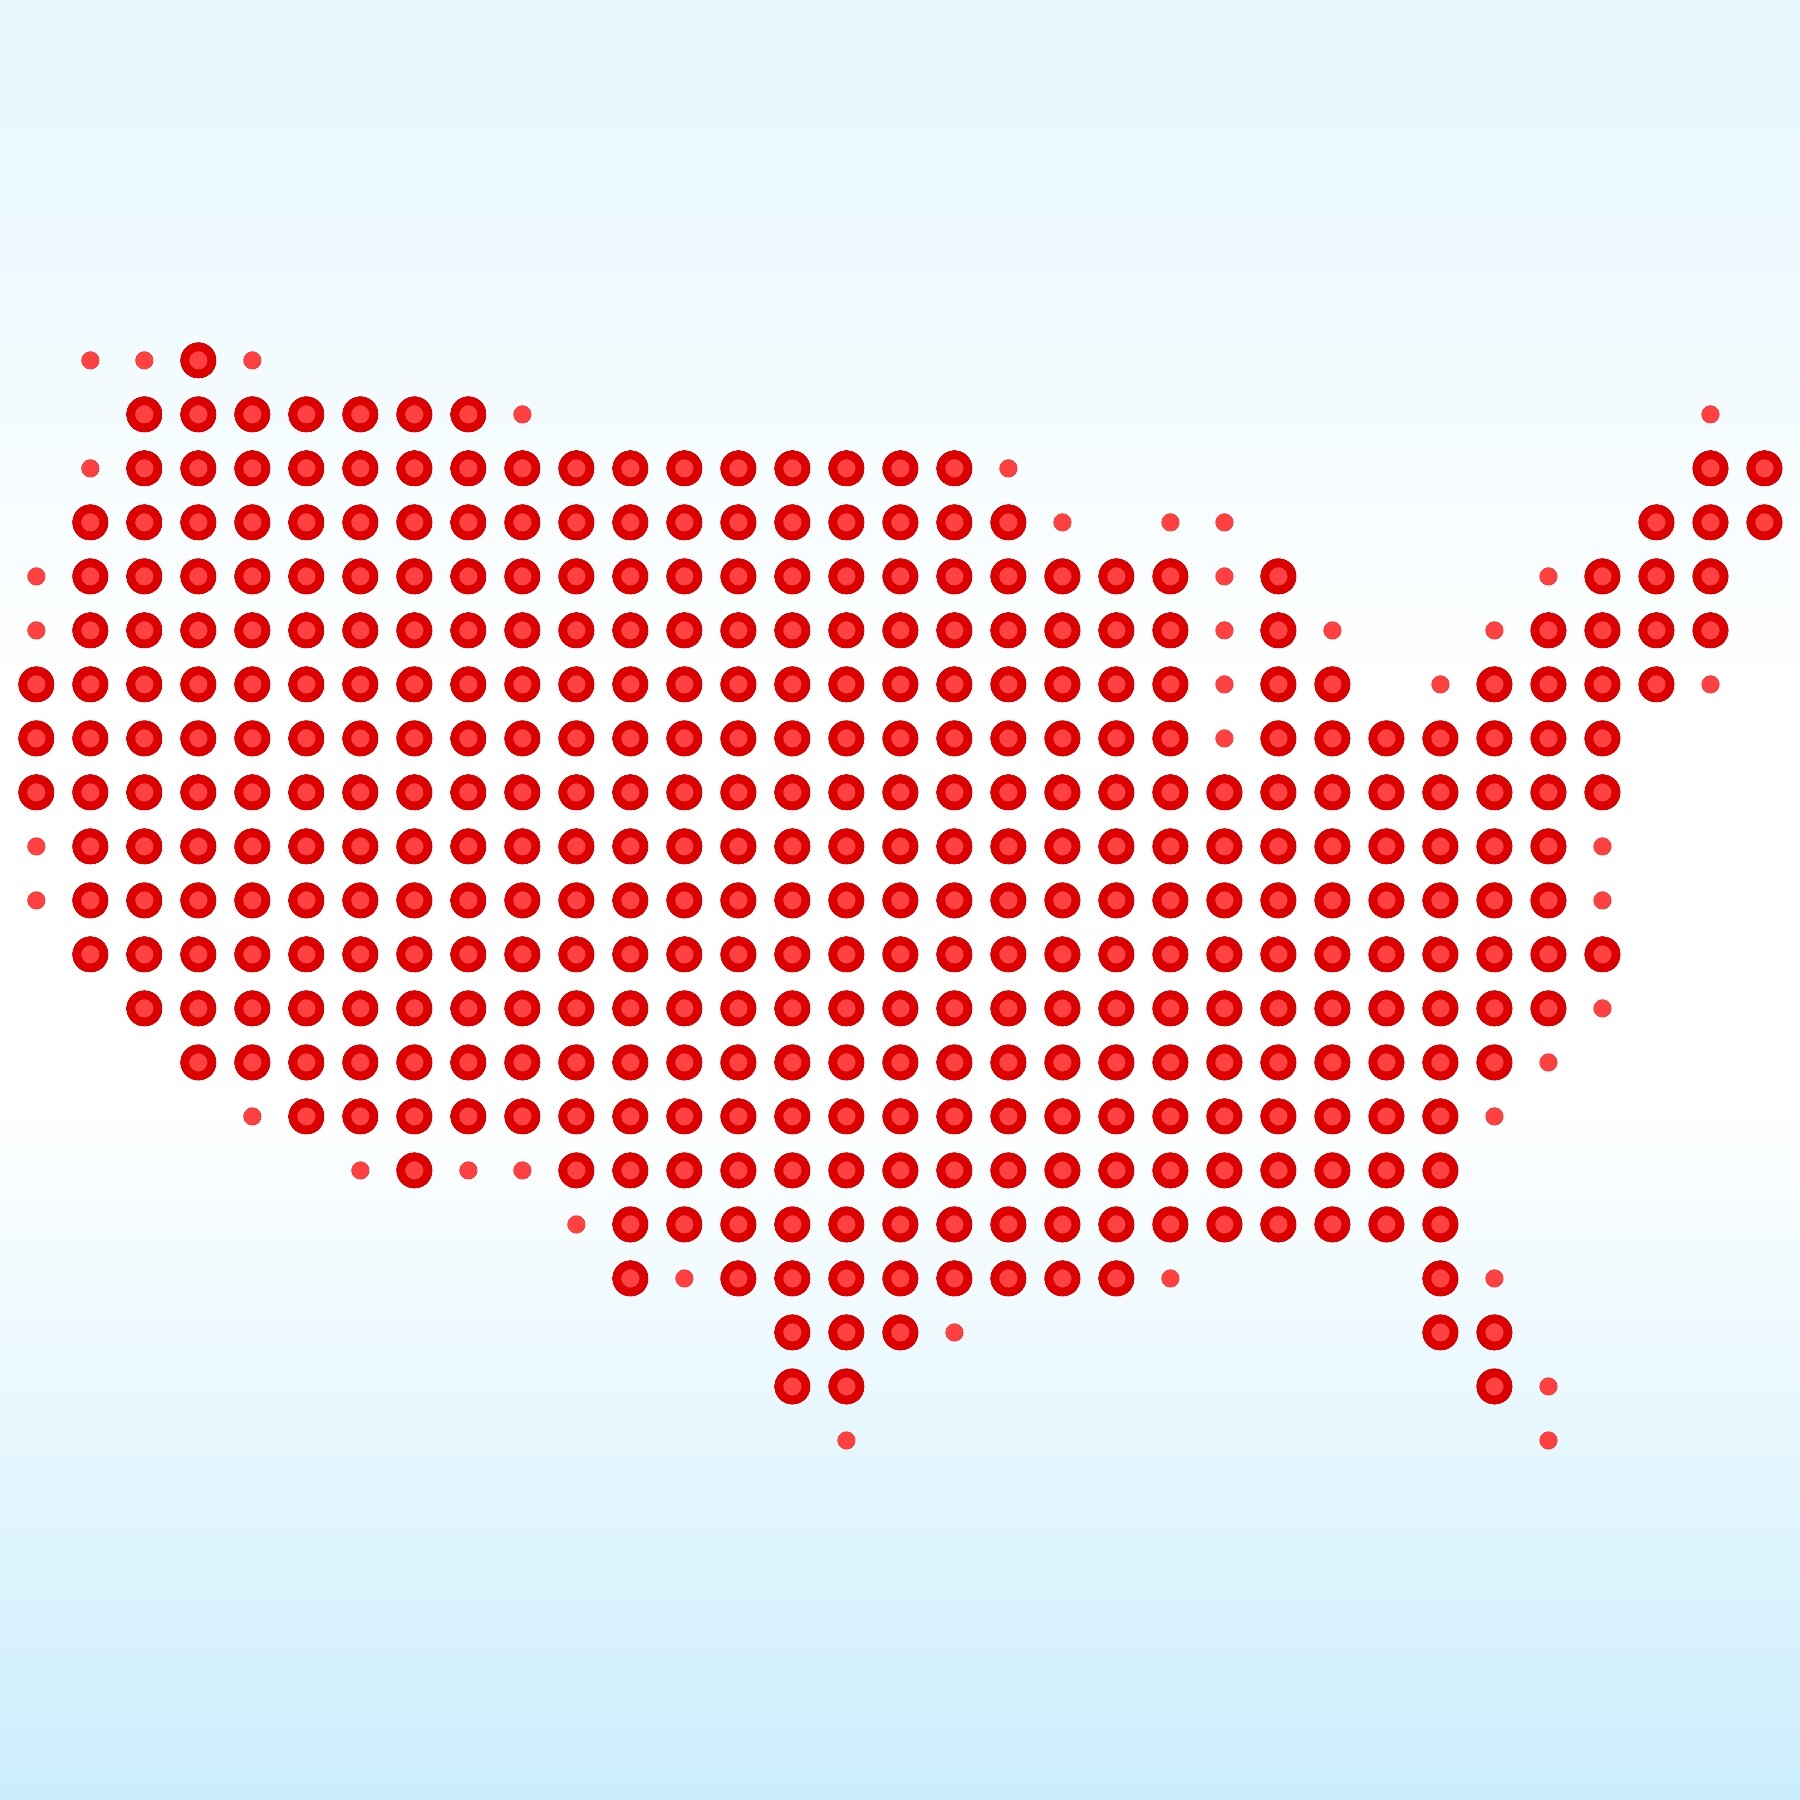 US map made of red dots